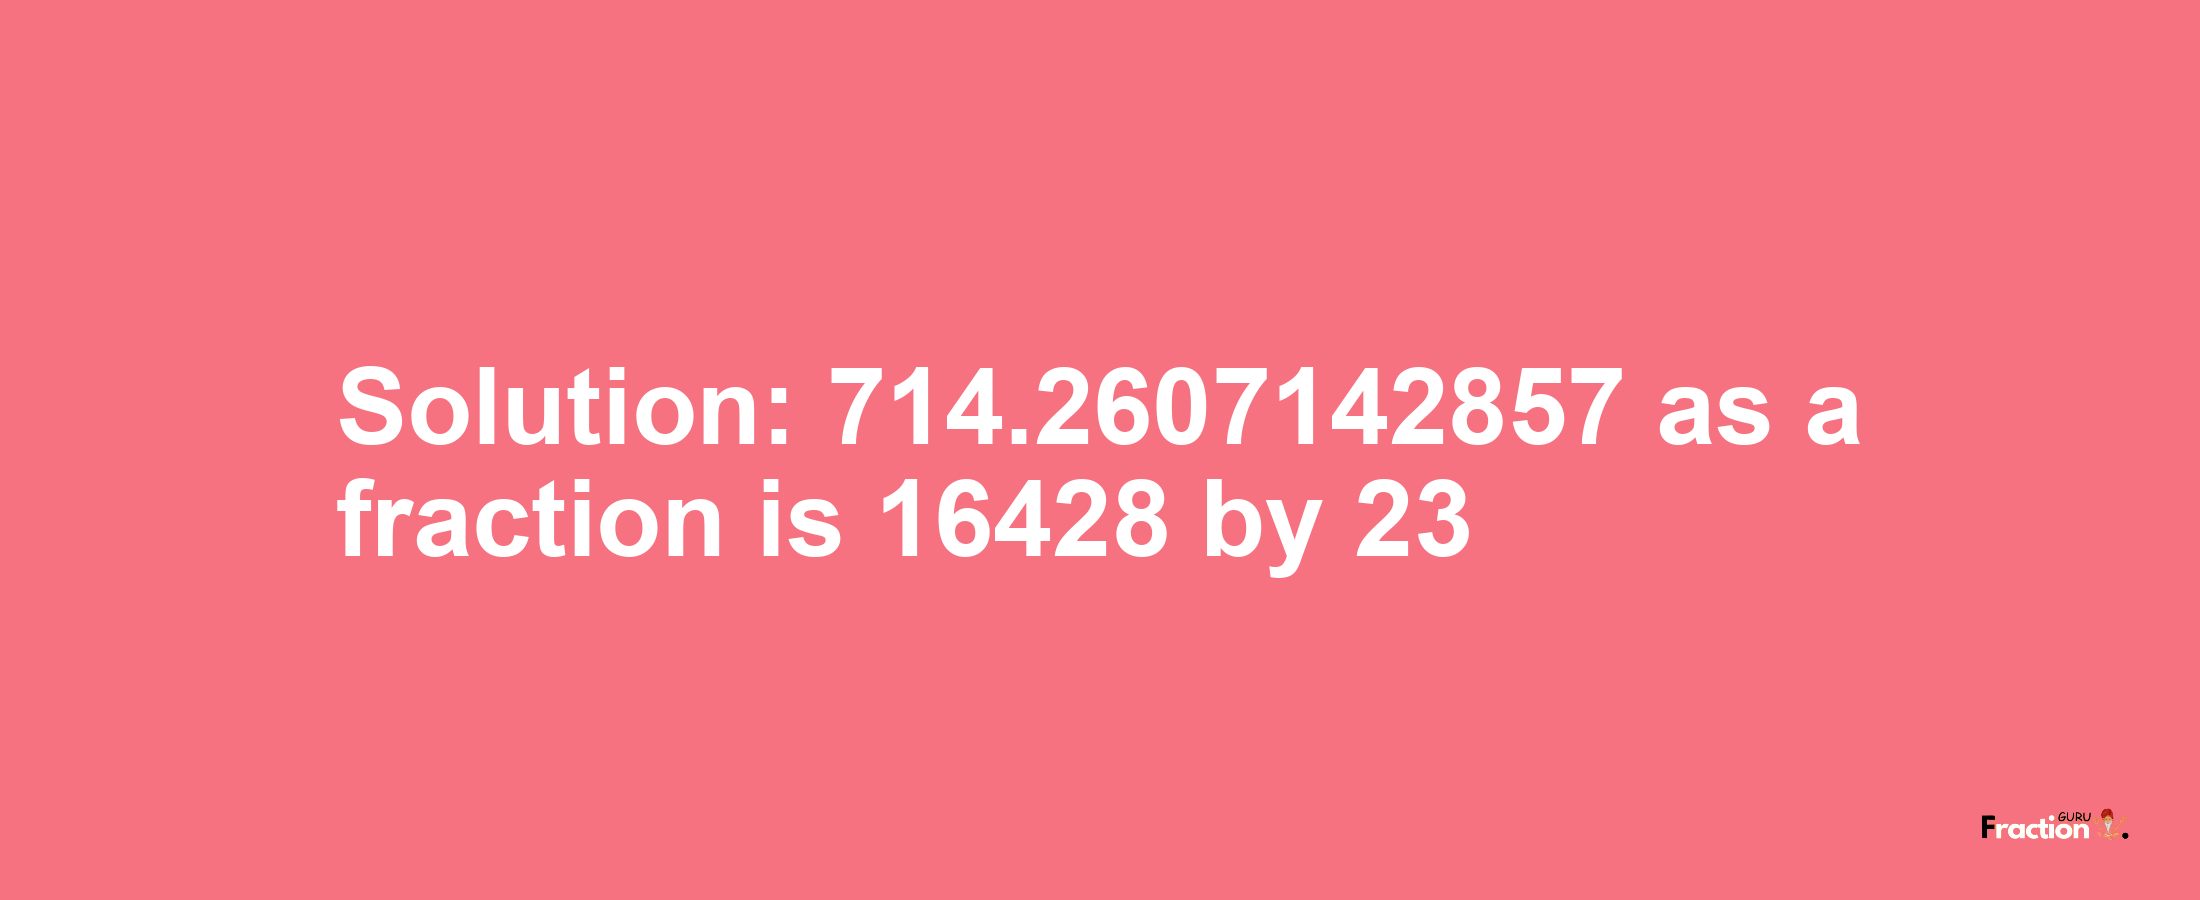 Solution:714.2607142857 as a fraction is 16428/23